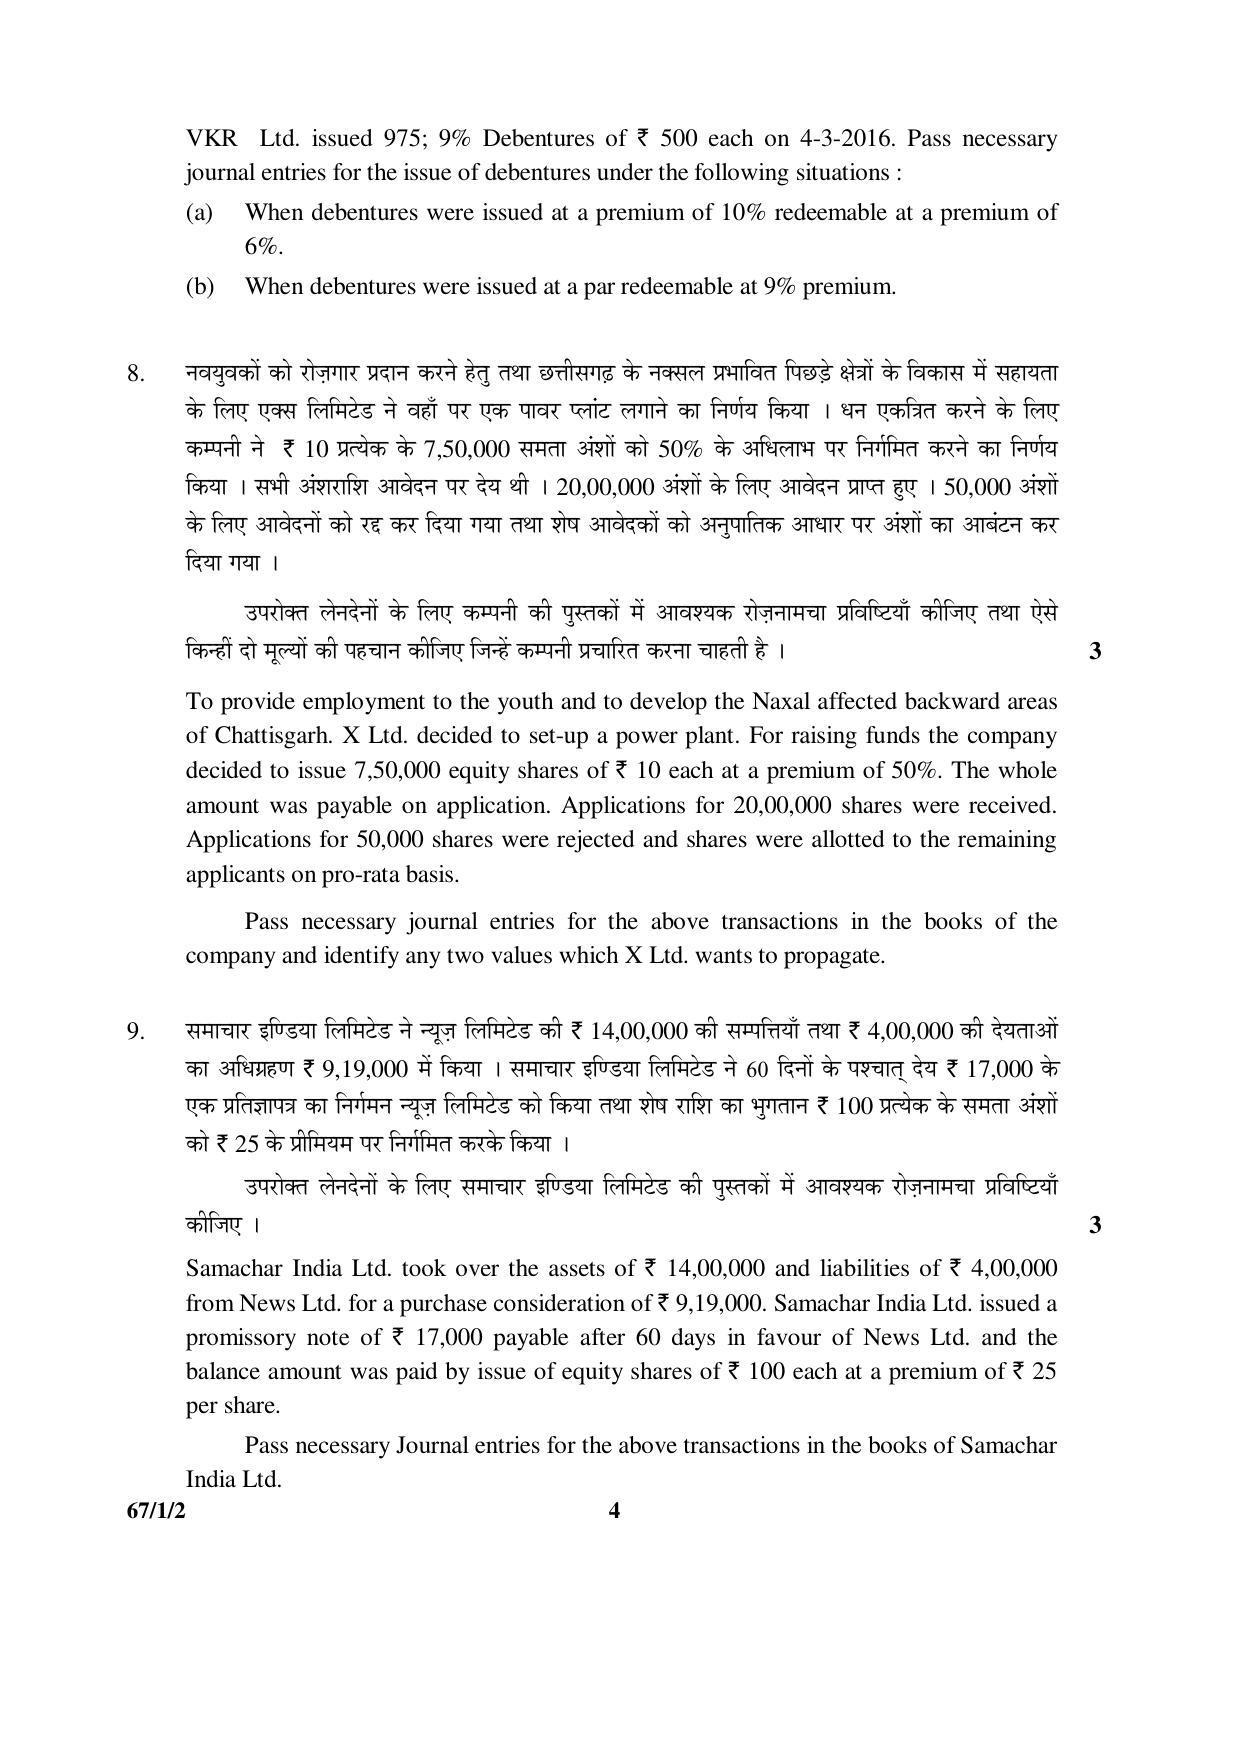 CBSE Class 12 67-1-2 ACCOUNTANCY 2016 Question Paper - Page 4